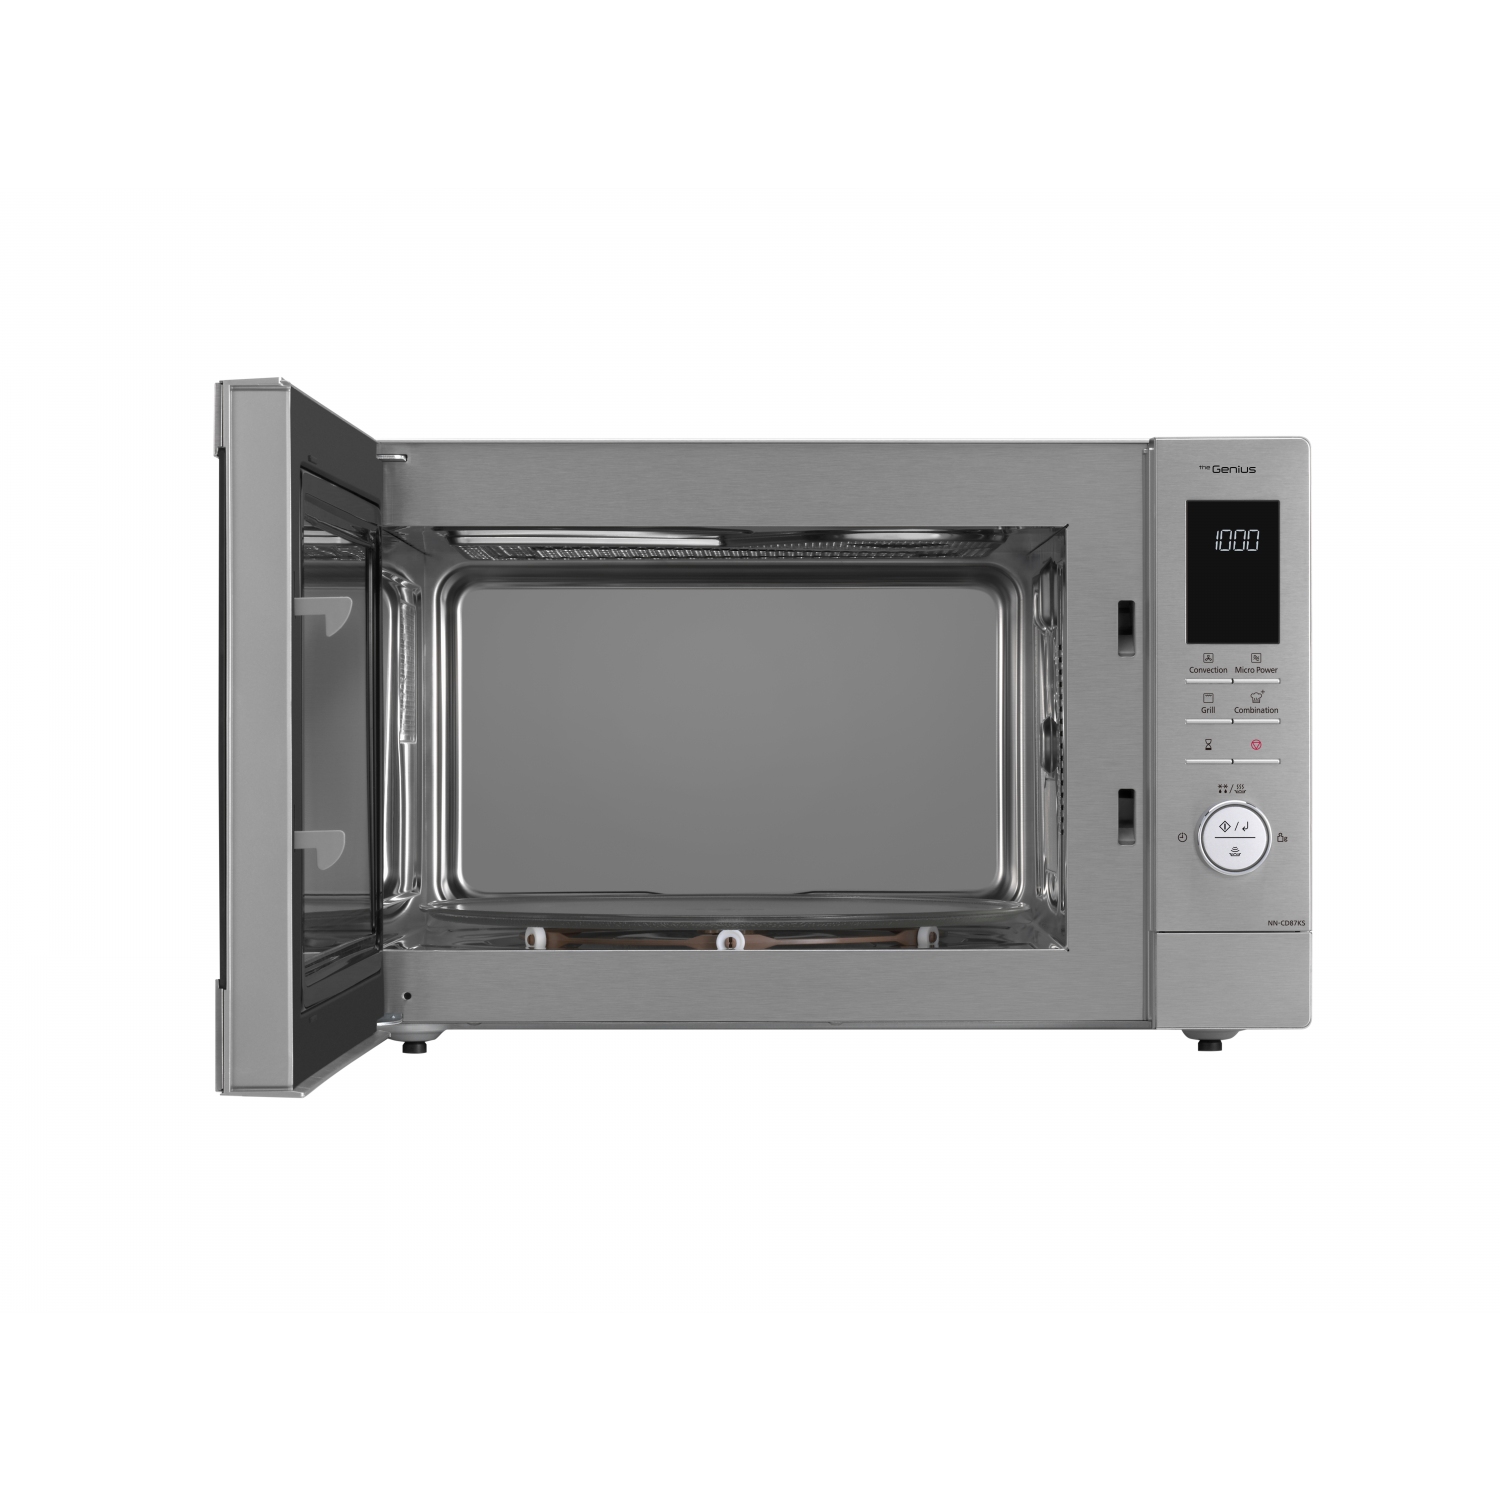 Panasonic 34L 1000w Combination Microwave Oven with Inverter Technology and 1300w Grill - 1